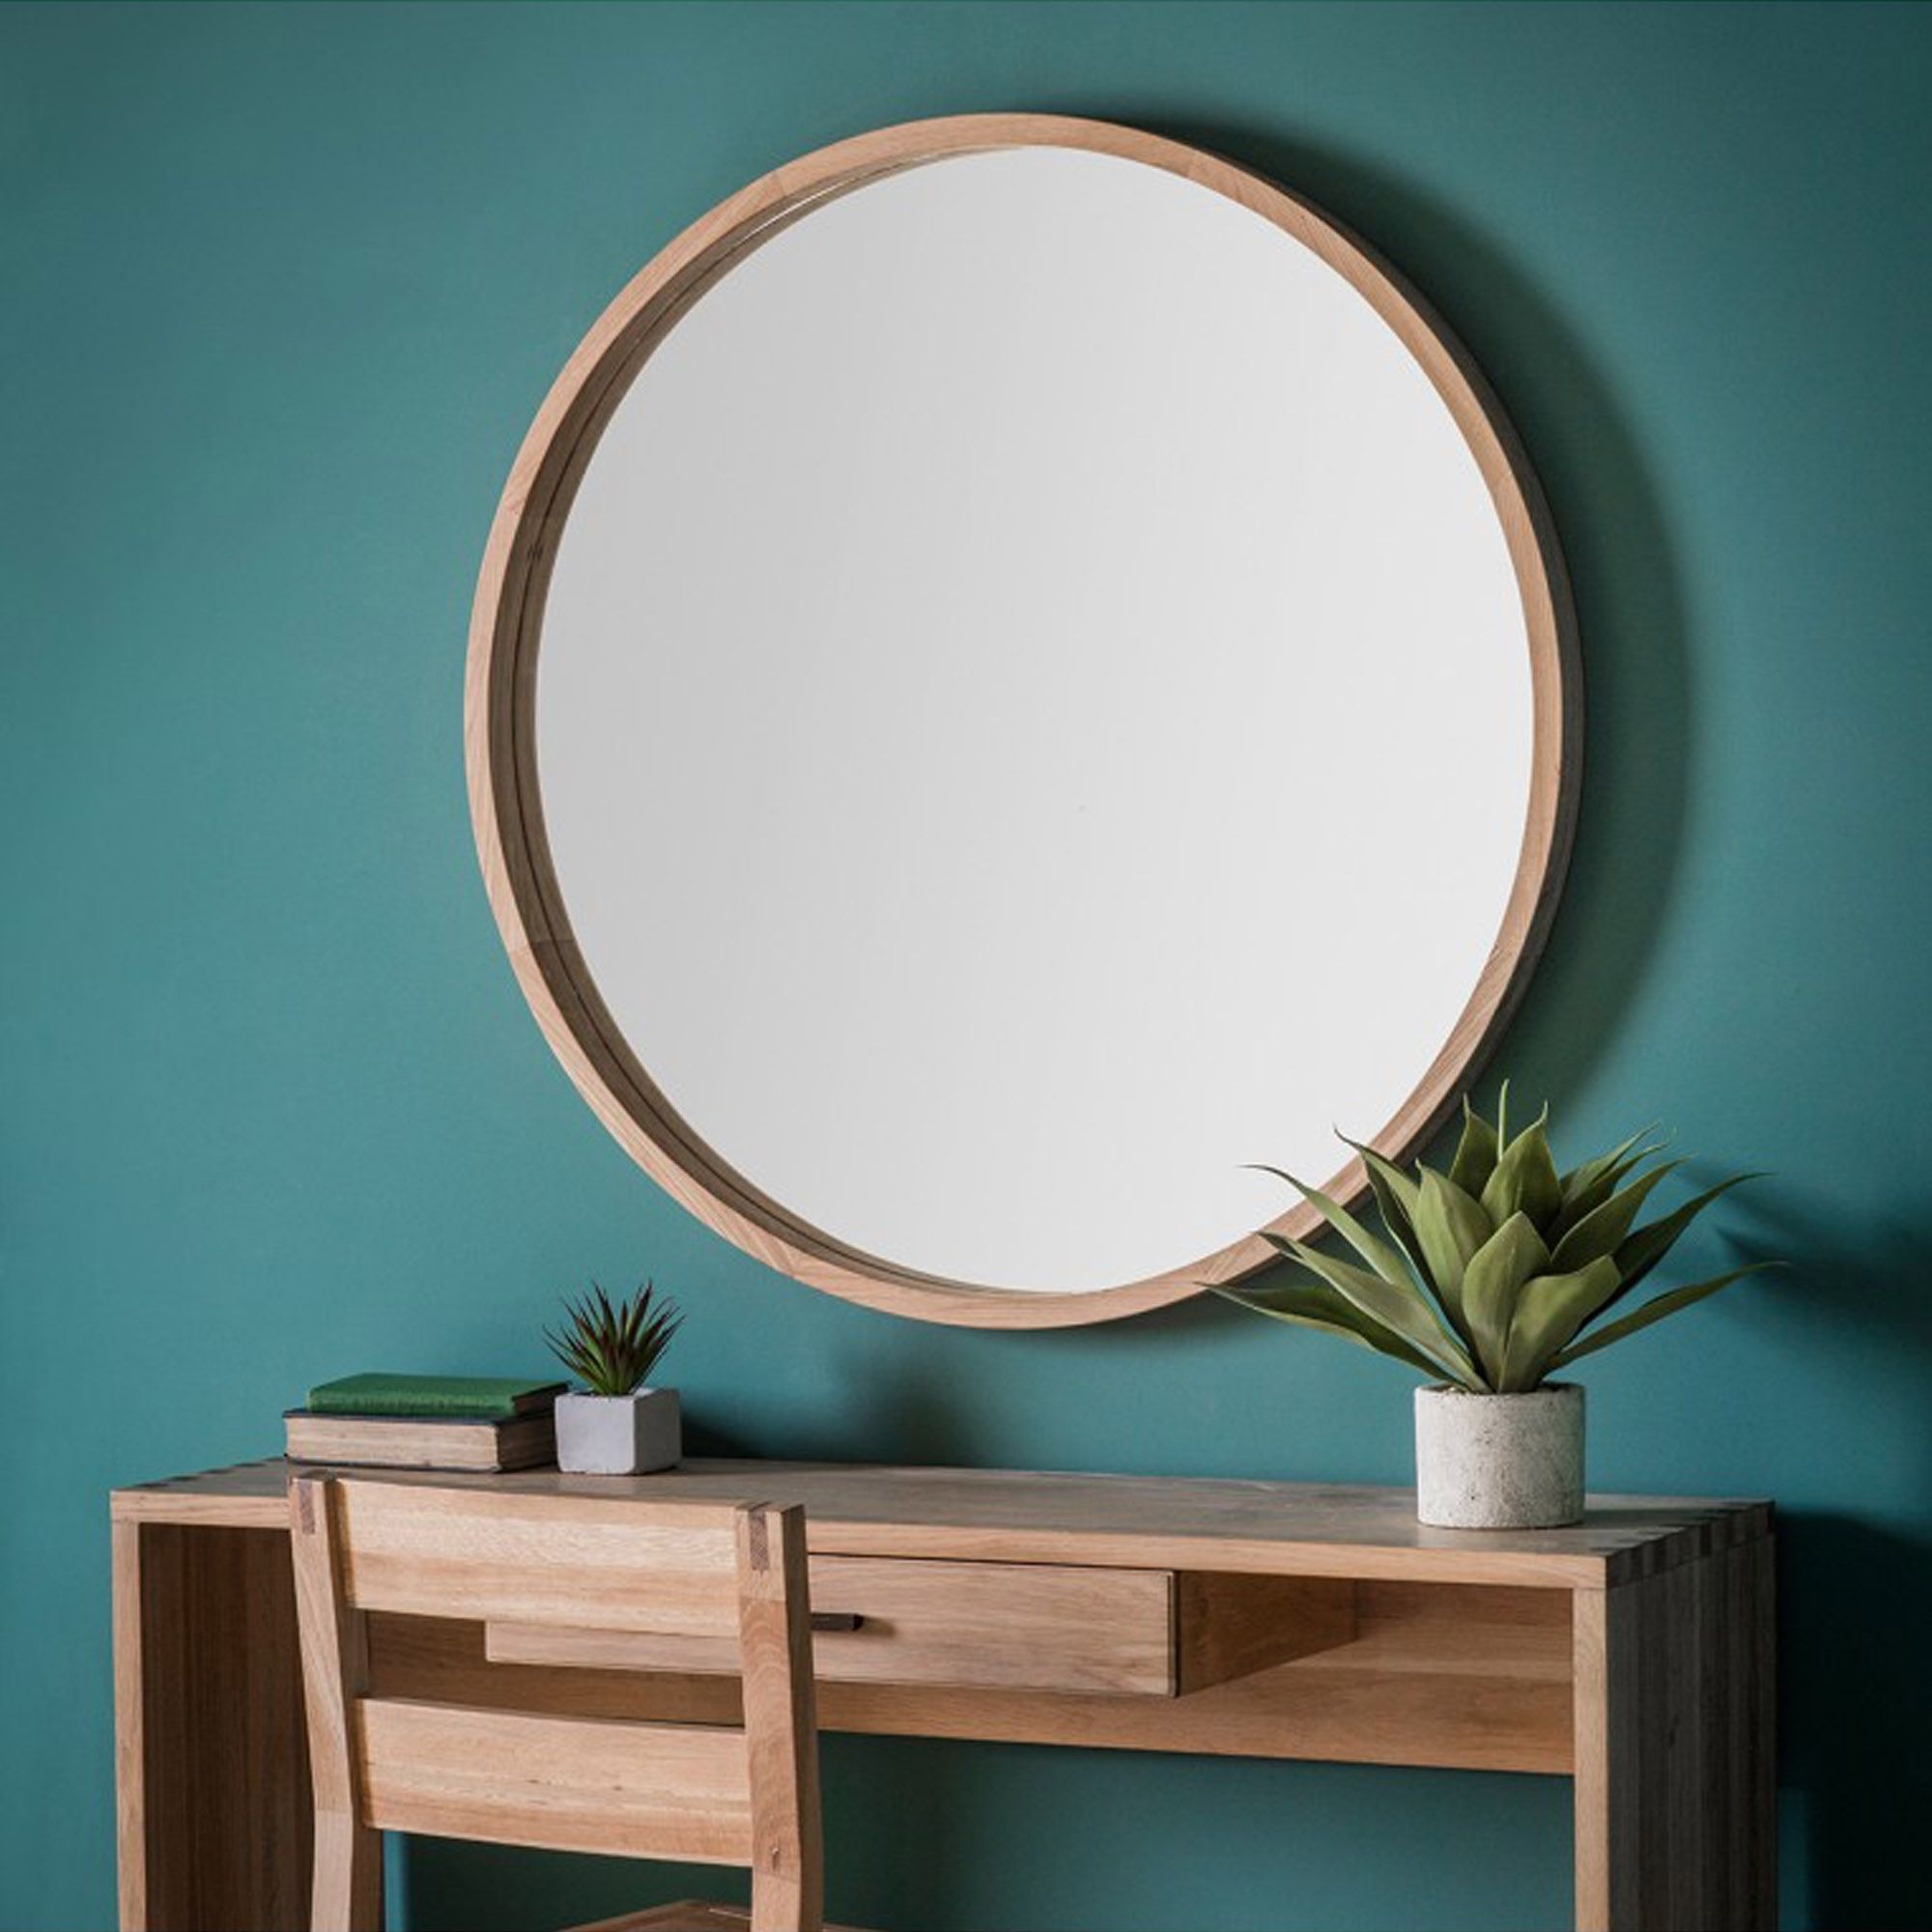 Bowman Large Round Wall Mirror | Wall Mirrors | Homesdirect365 In Scalloped Round Modern Oversized Wall Mirrors (View 4 of 15)